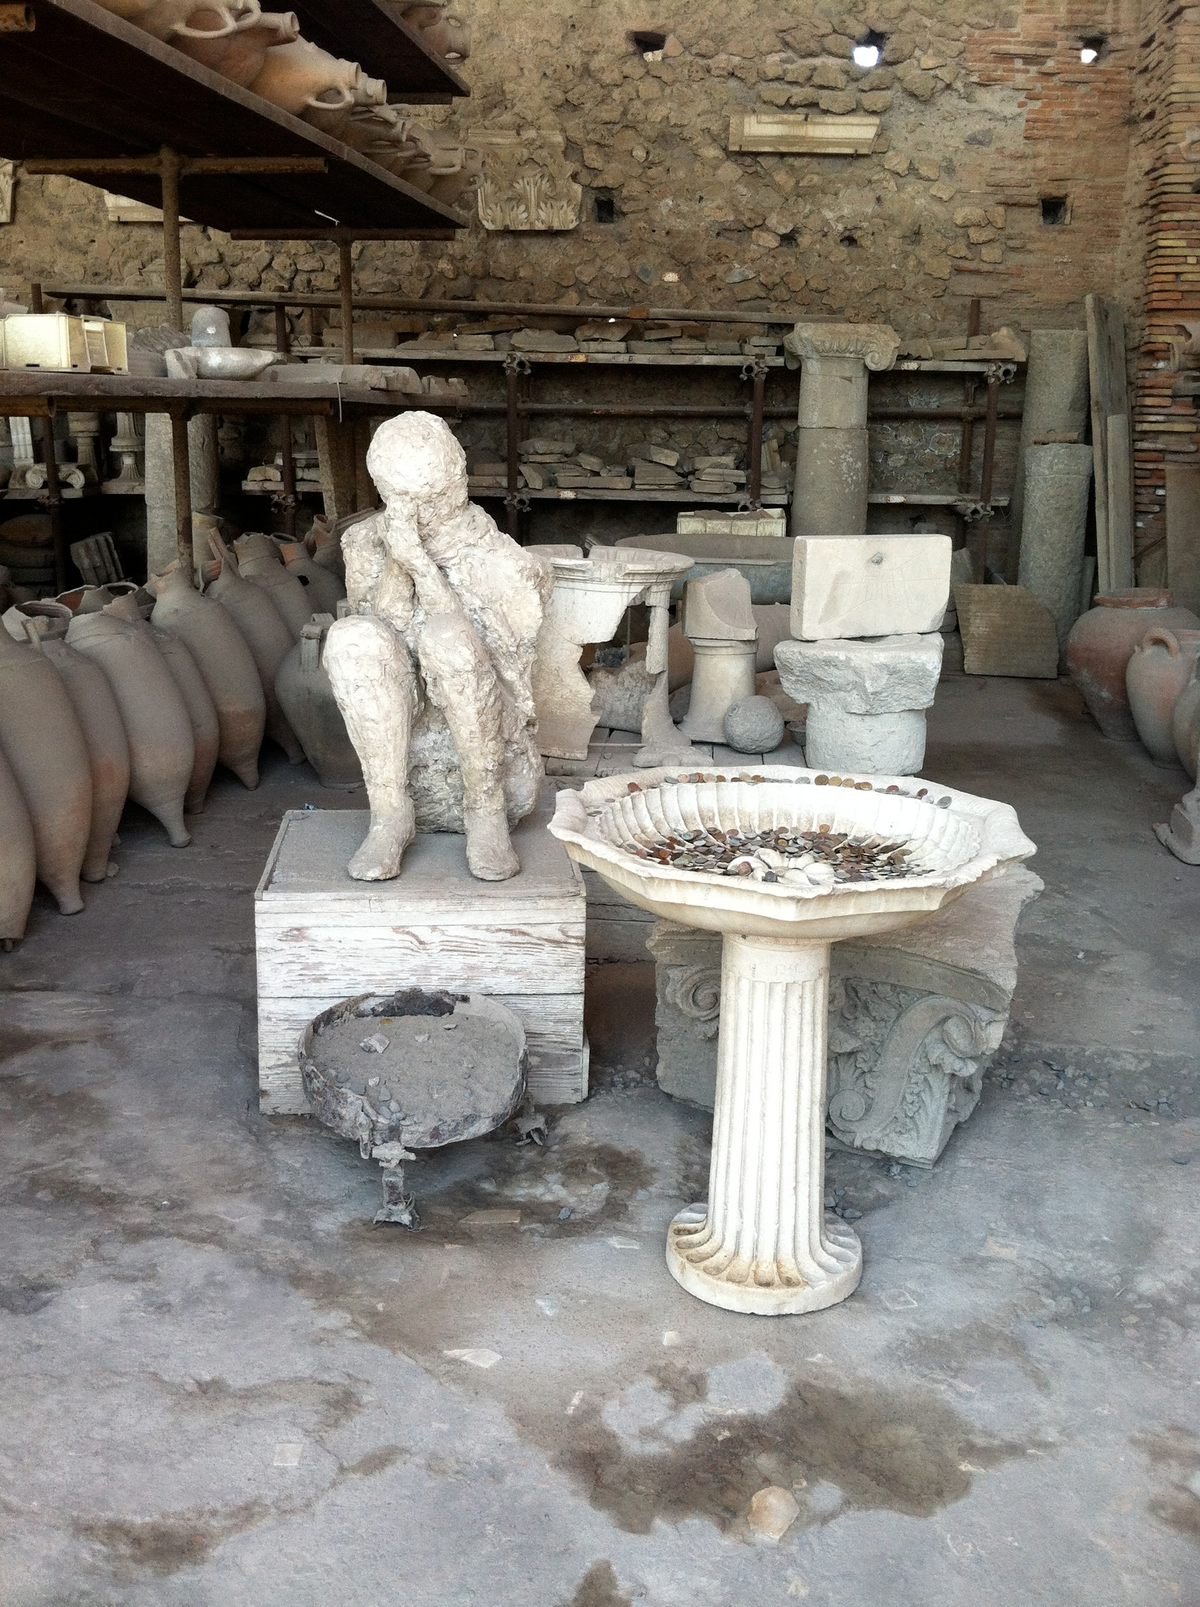 The last moments of the ill-fated Pompeiians, frozen forever in plaster